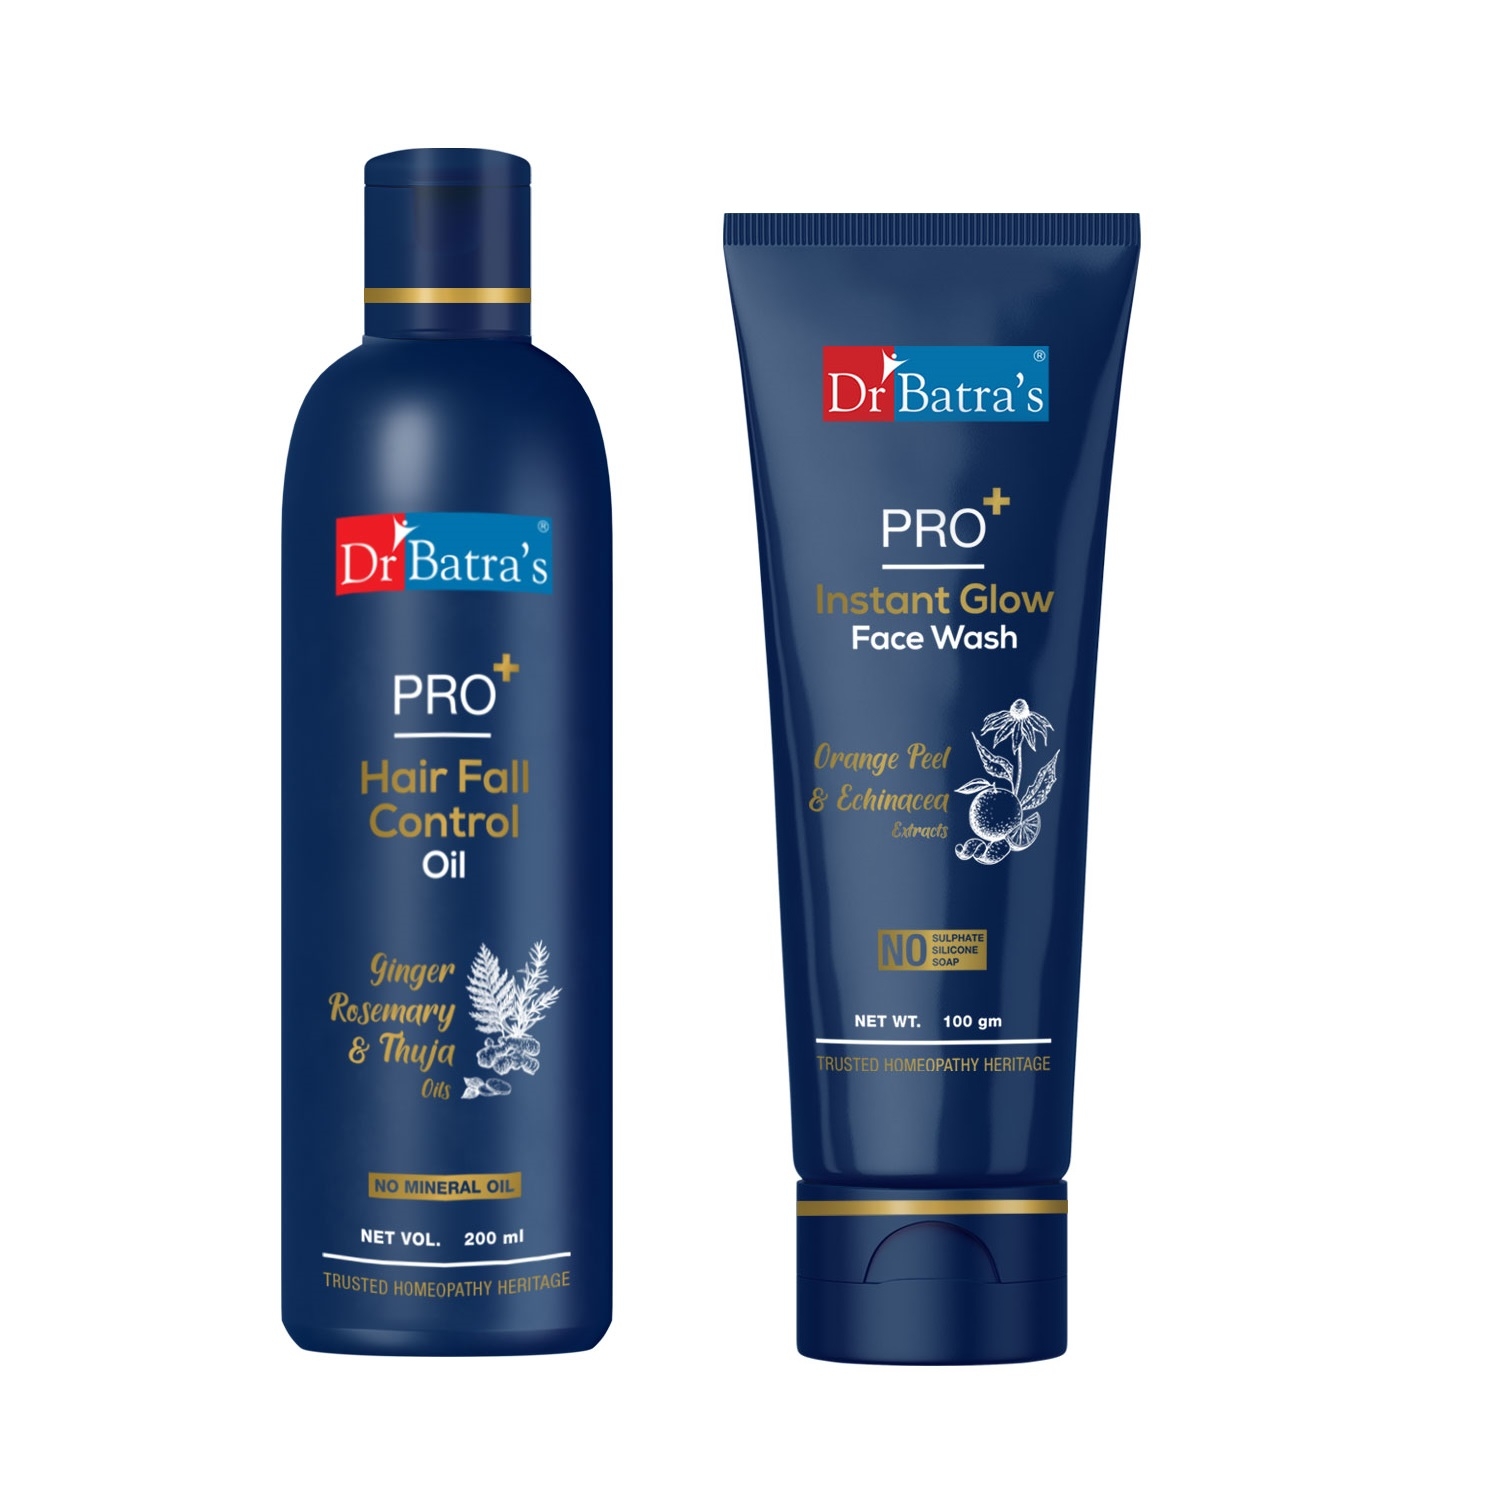 Dr Batra's | Dr Batra's PRO+ Hair Fall Control Oil -200ml and PRO+Instant Glow Face Wash-100 g